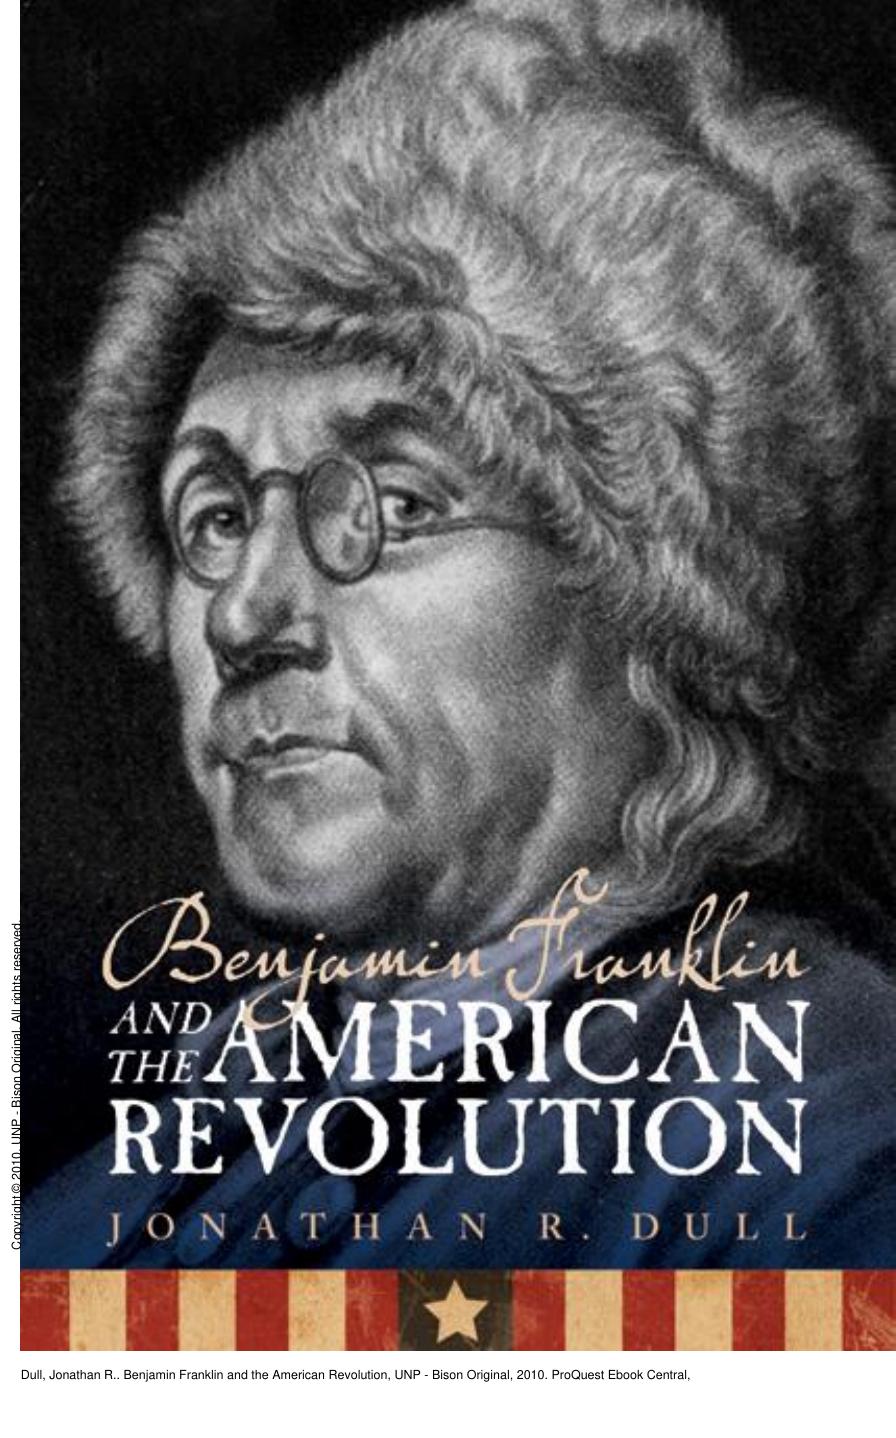 Benjamin Franklin and the American Revolution by Jonathan R. Dull